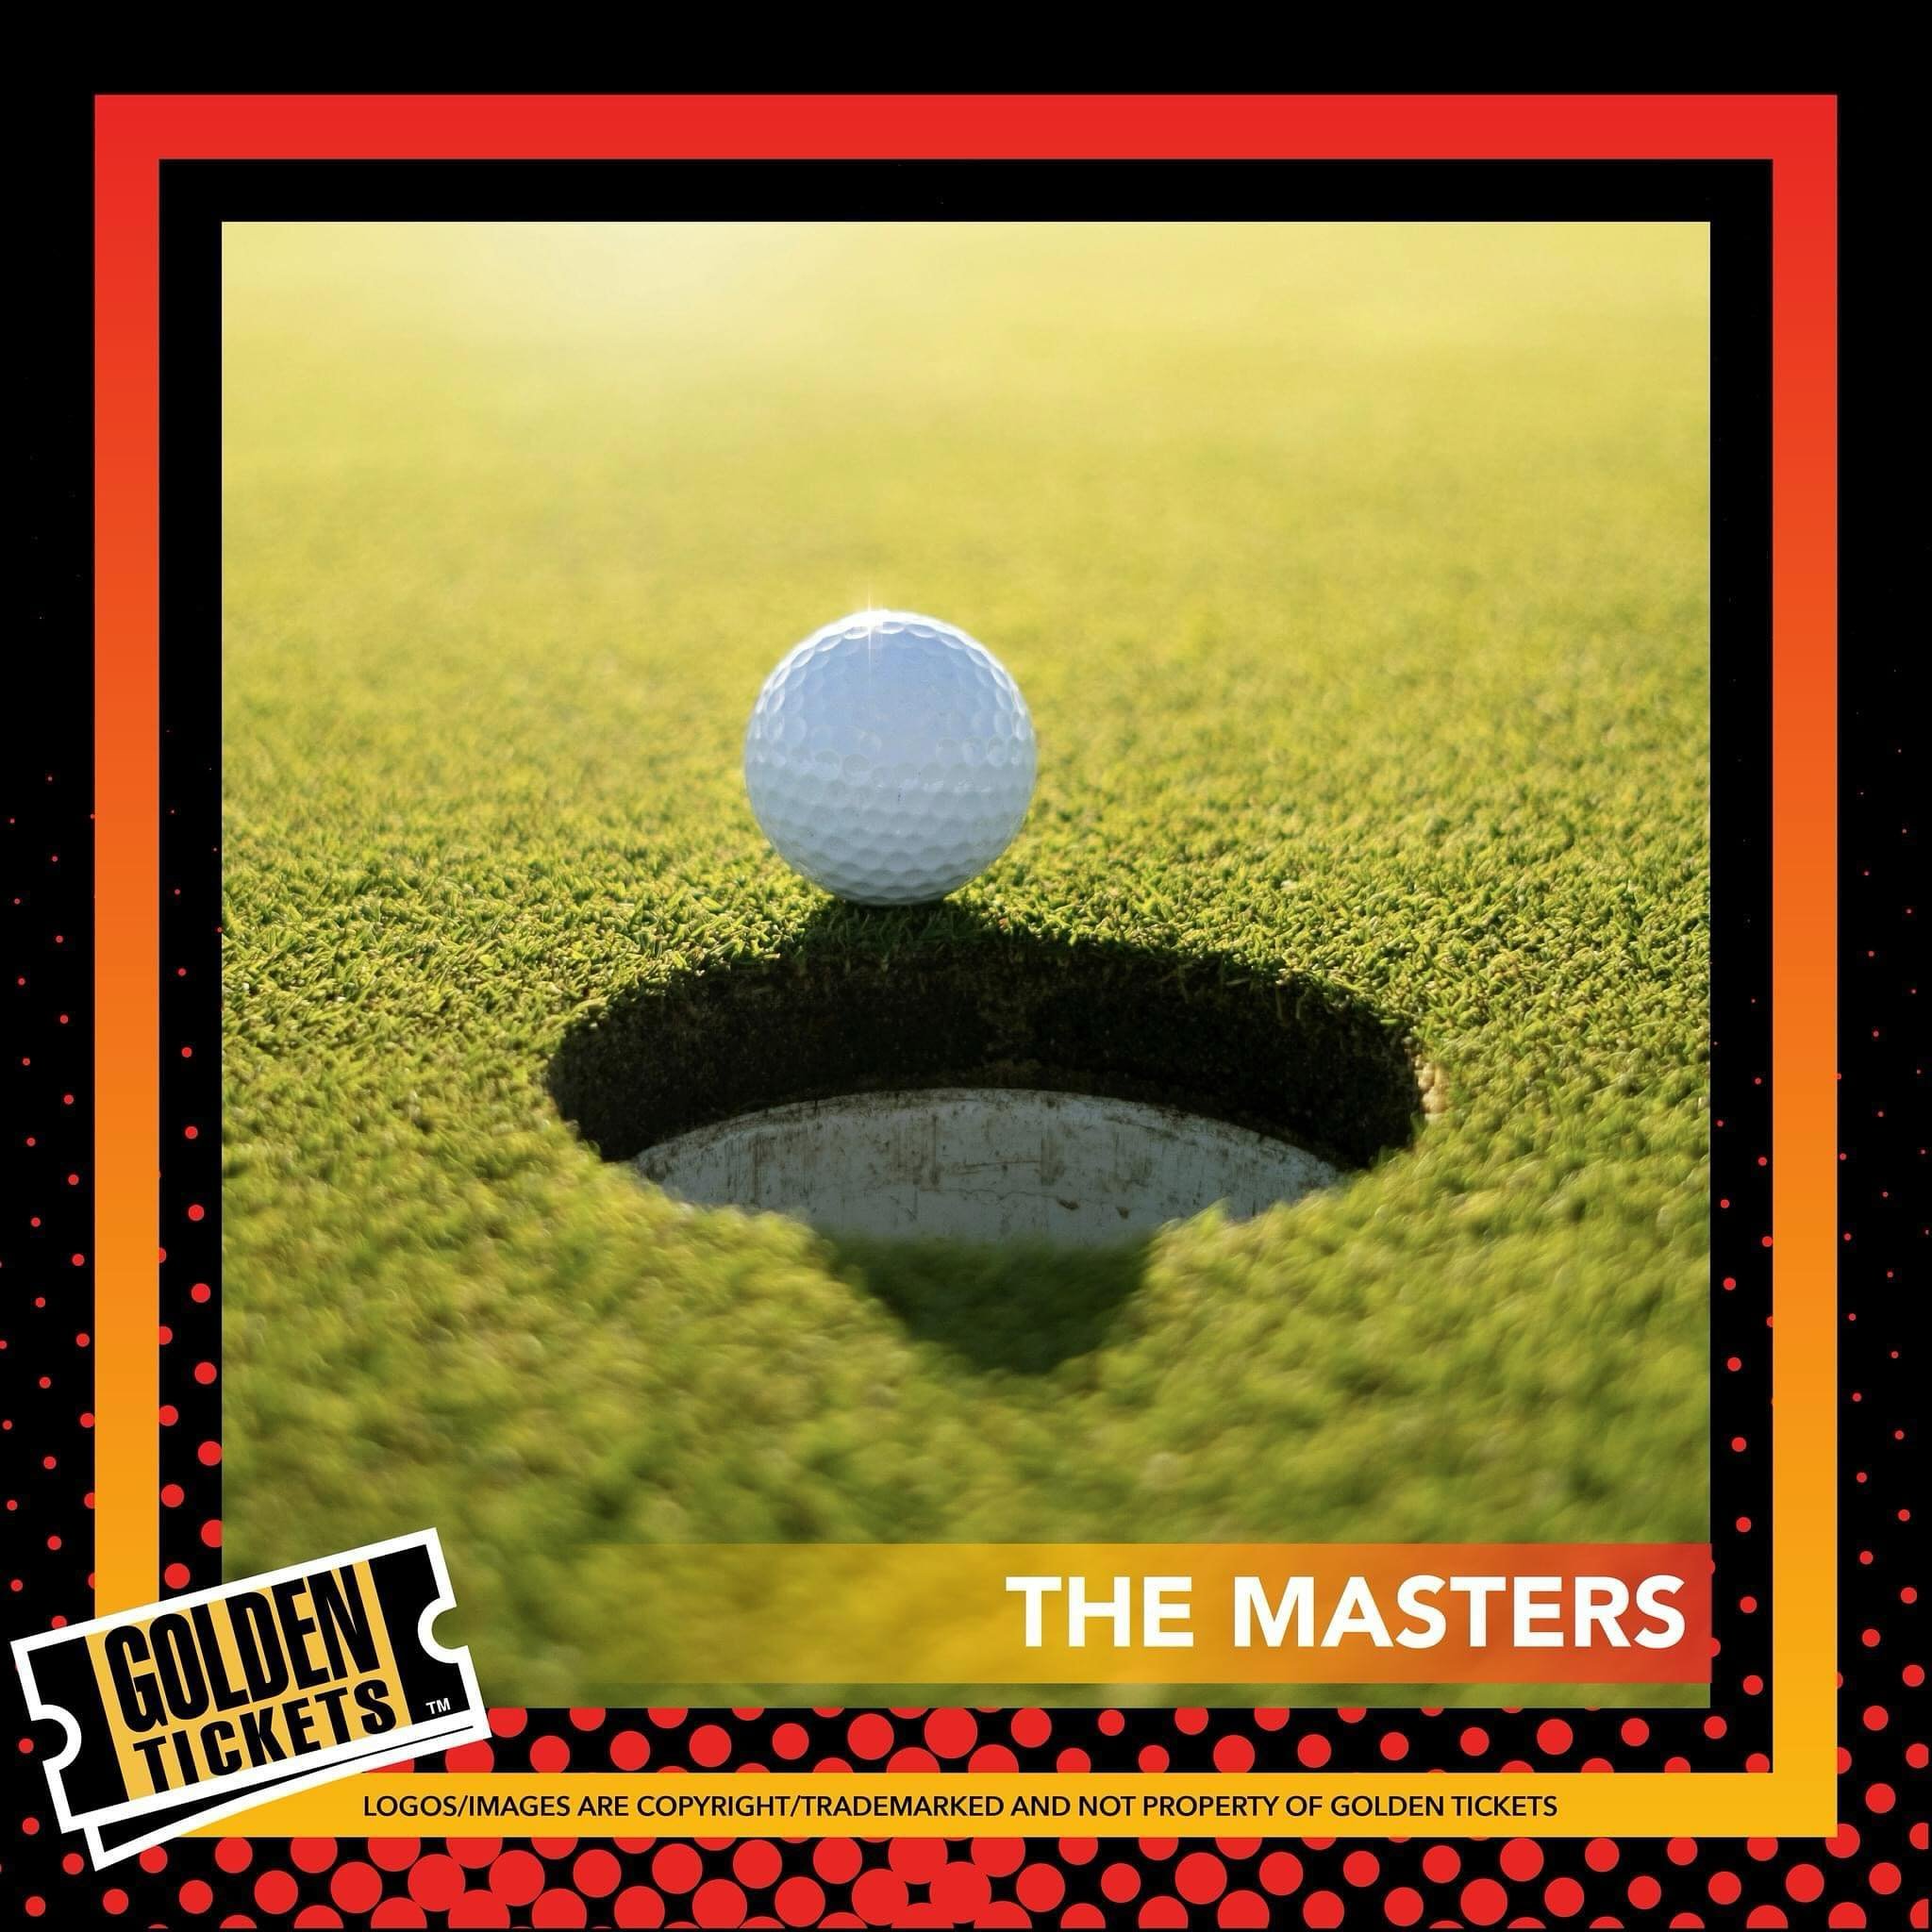 One last reminder.. The Masters is happening THIS WEEK! 

We do still have tickets available for some of the days - be sure to check it out and share our link to any and all gold lovers in your life! 
#themasters#gulftime#كولف#tampa#florida#augusta#g